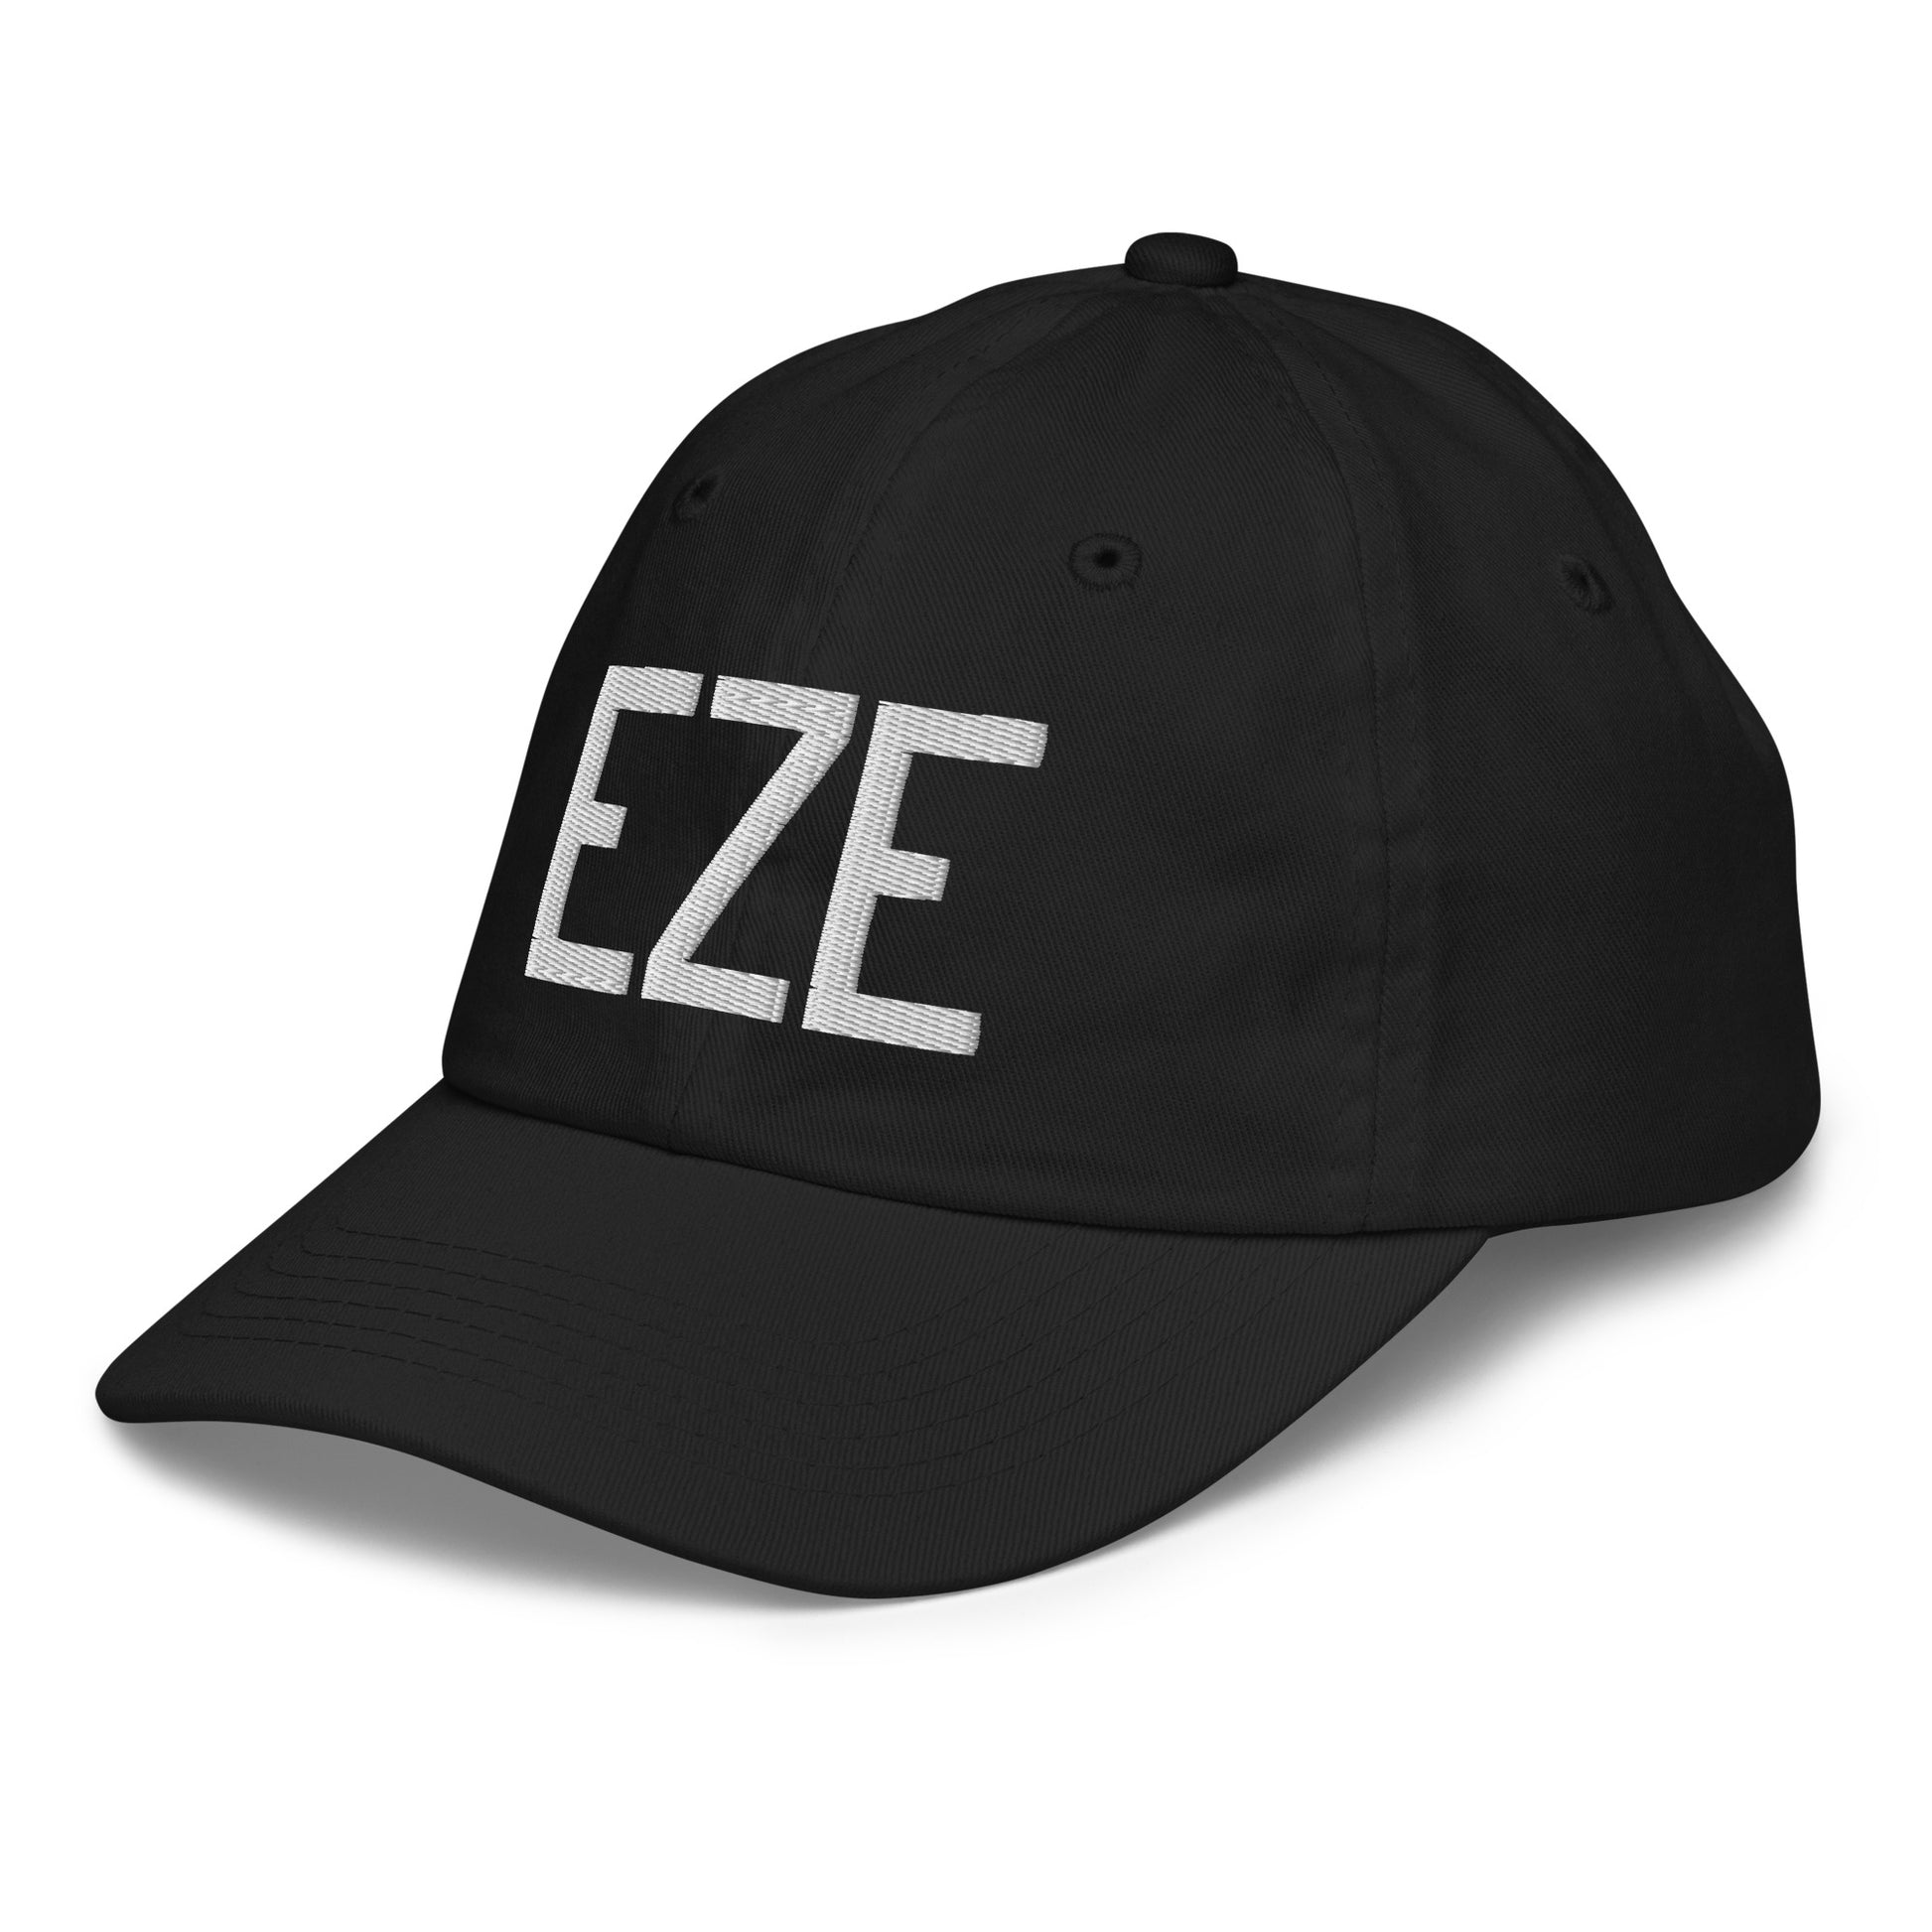 Airport Code Kid's Baseball Cap - White • EZE Buenos Aires • YHM Designs - Image 13